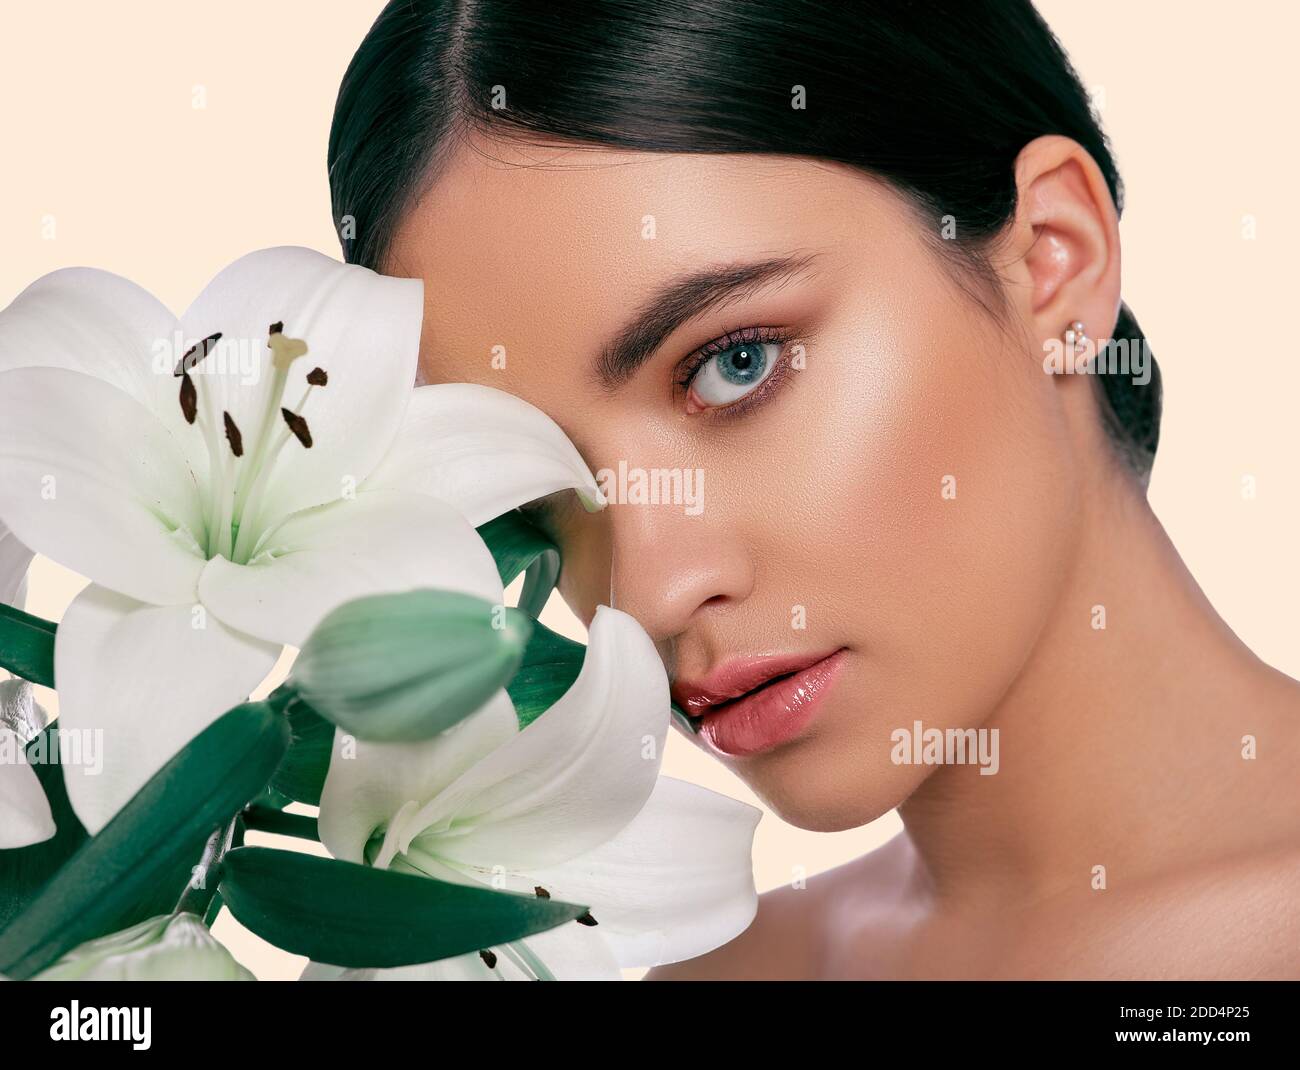 Skin care concept. Brunette woman with clean, fresh skin and lily flower near her face, on set sail champagne color background Stock Photo